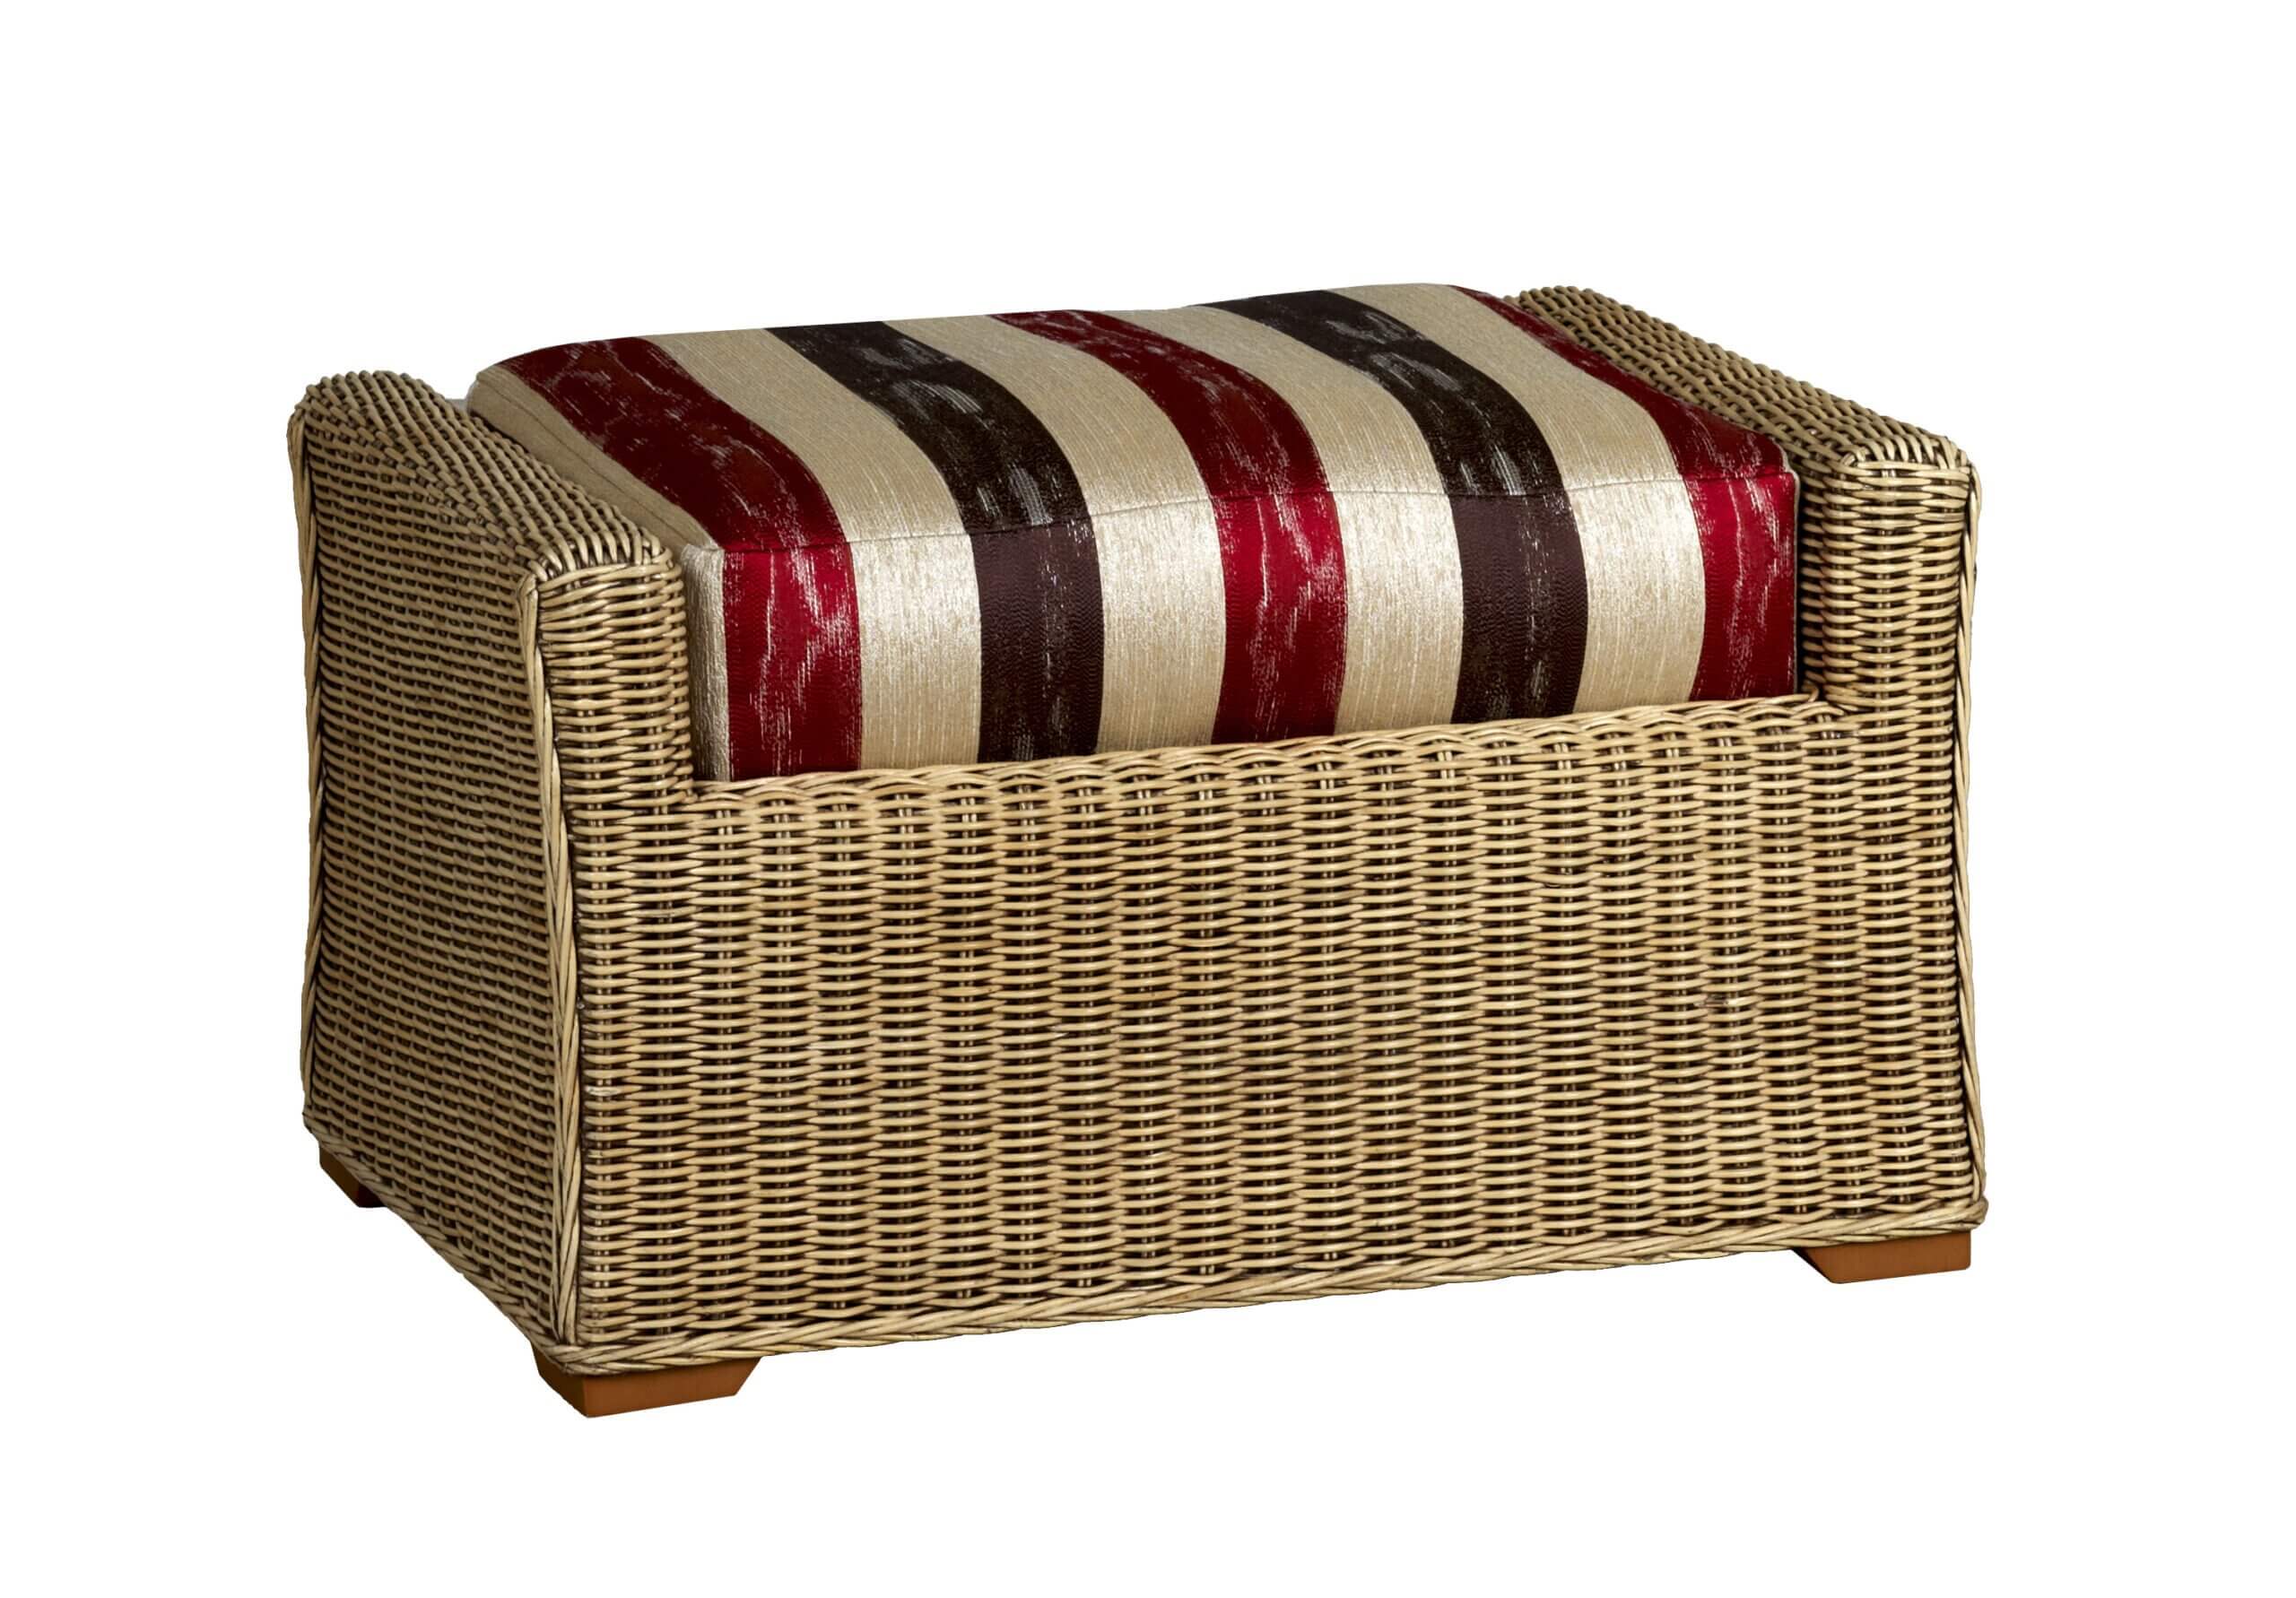 Showing image for Brando grand footstool